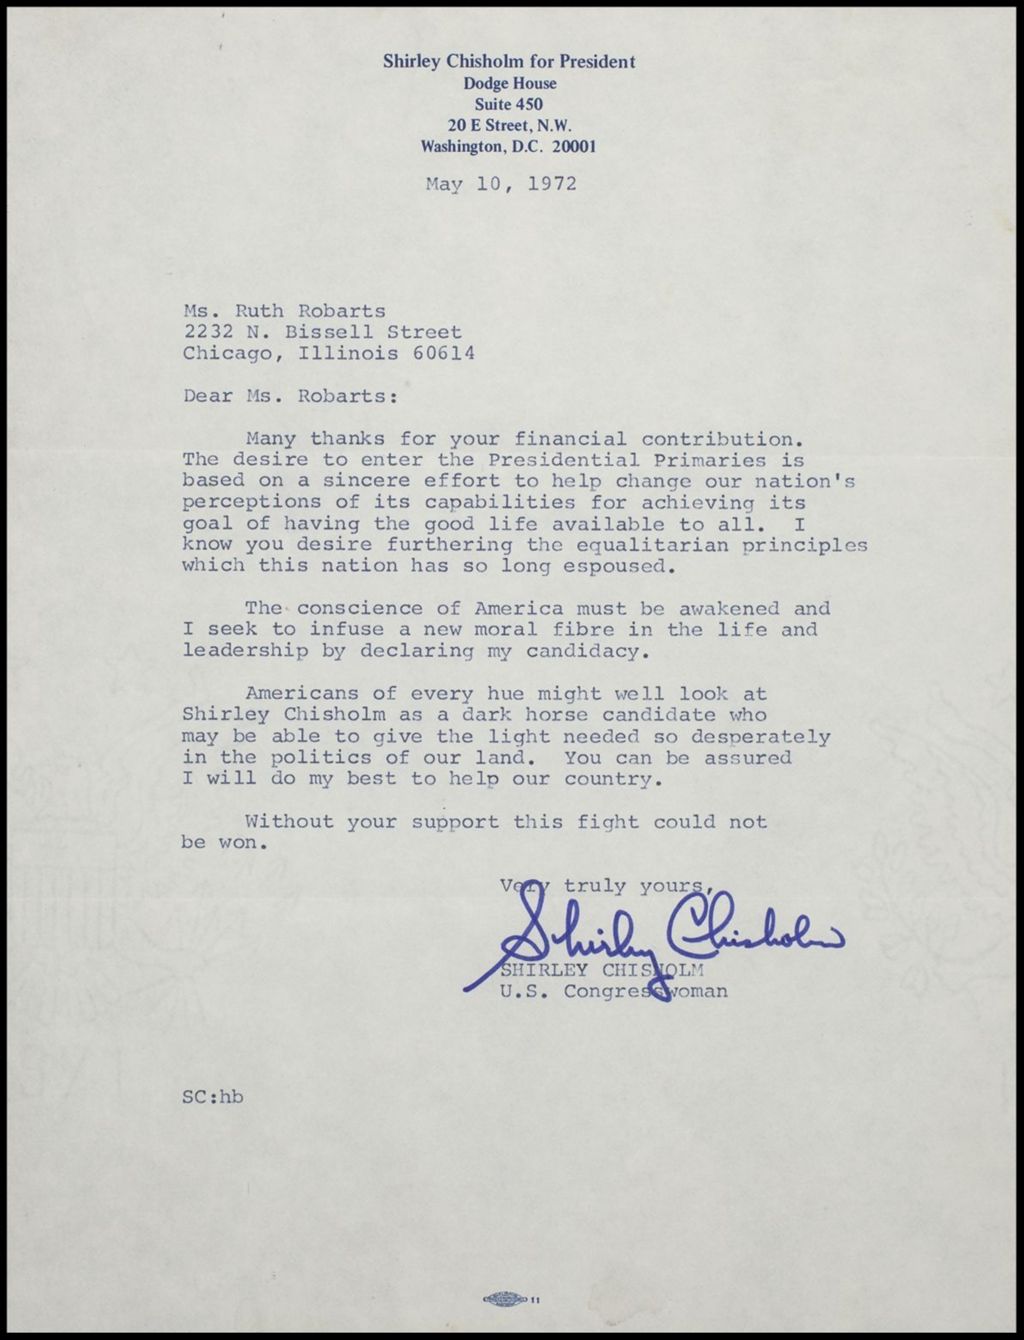 Miniature of Letter from Shirley Chisholm, 1972 (Folder 8)